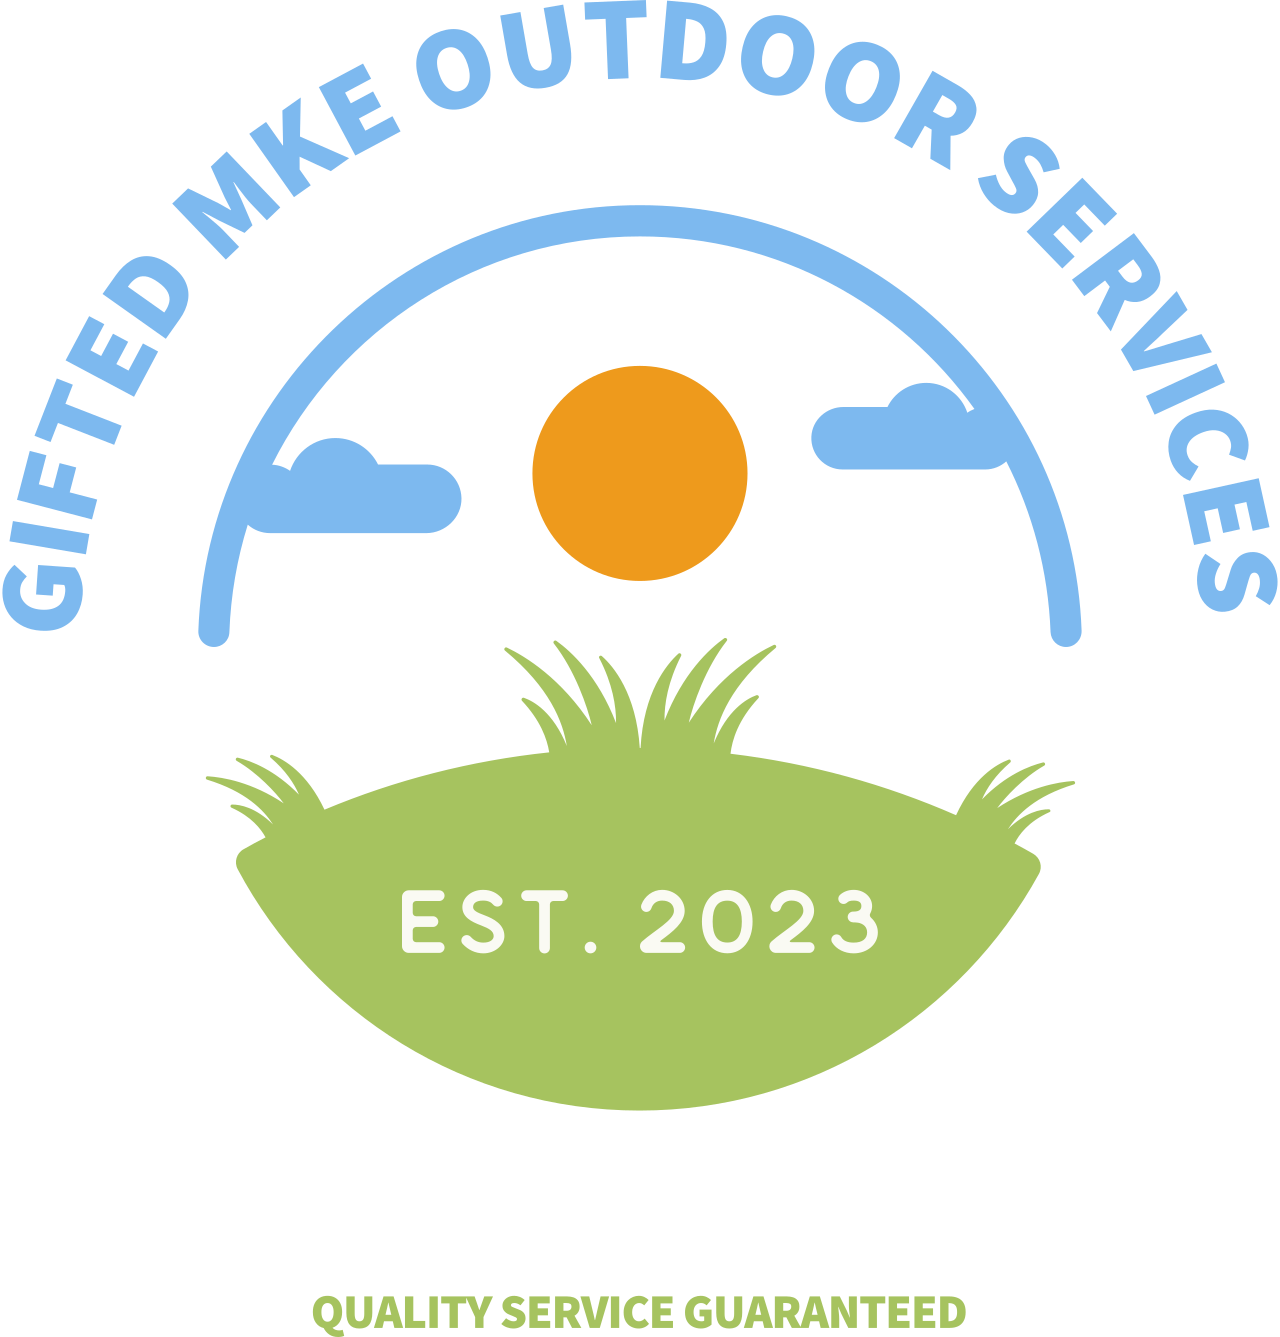 Gifted Mke Outdoor Services 's logo